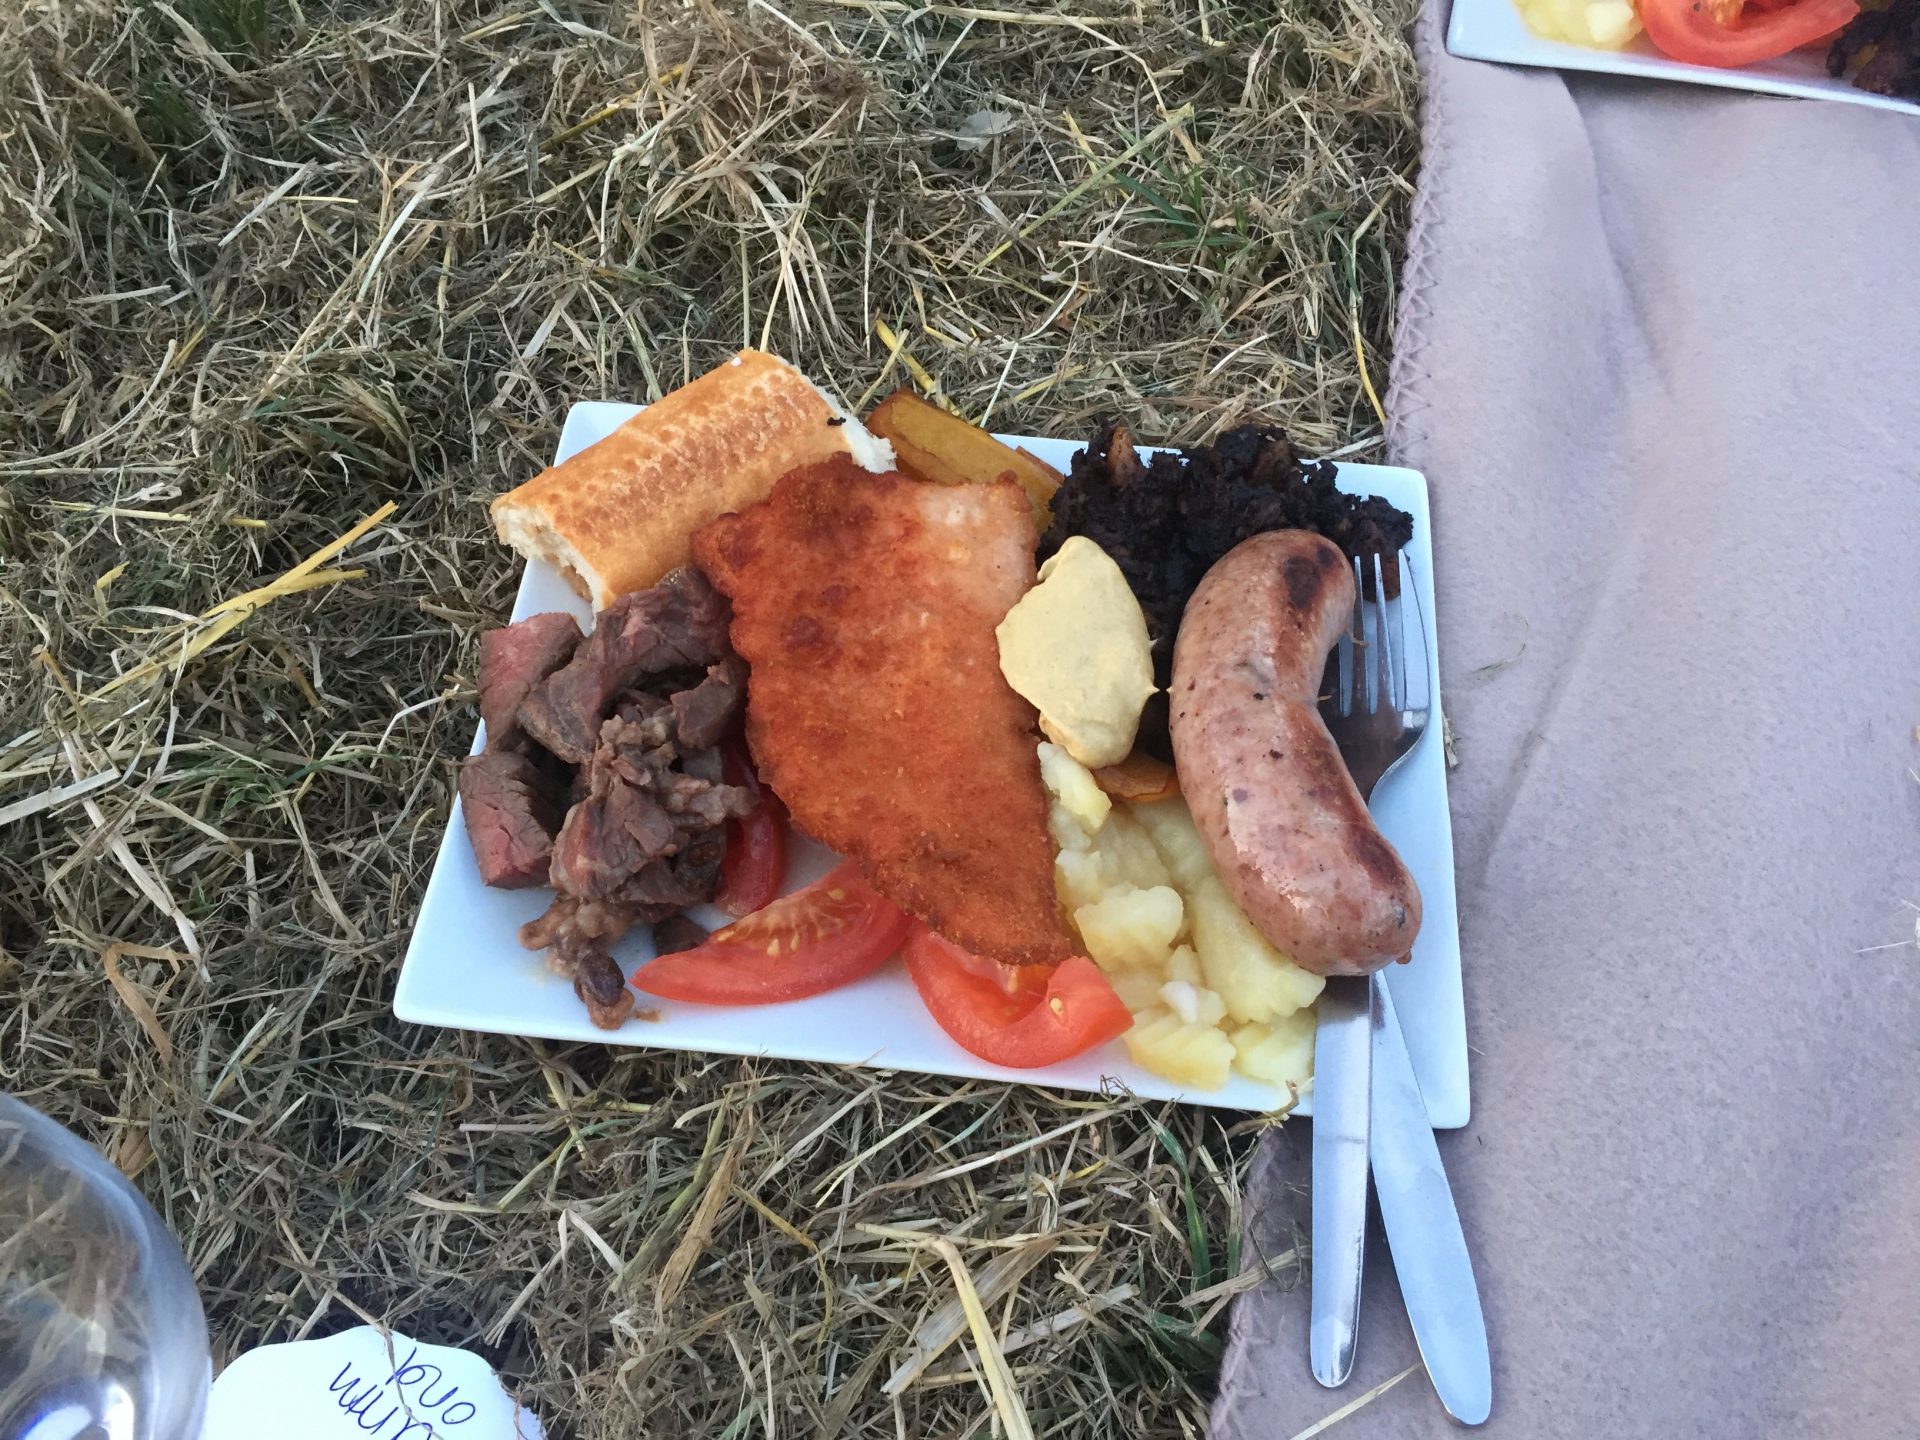 Some bloody delicious food that tick all the necessary "Austrian cuisine" boxes for me. At the Nussberg party.